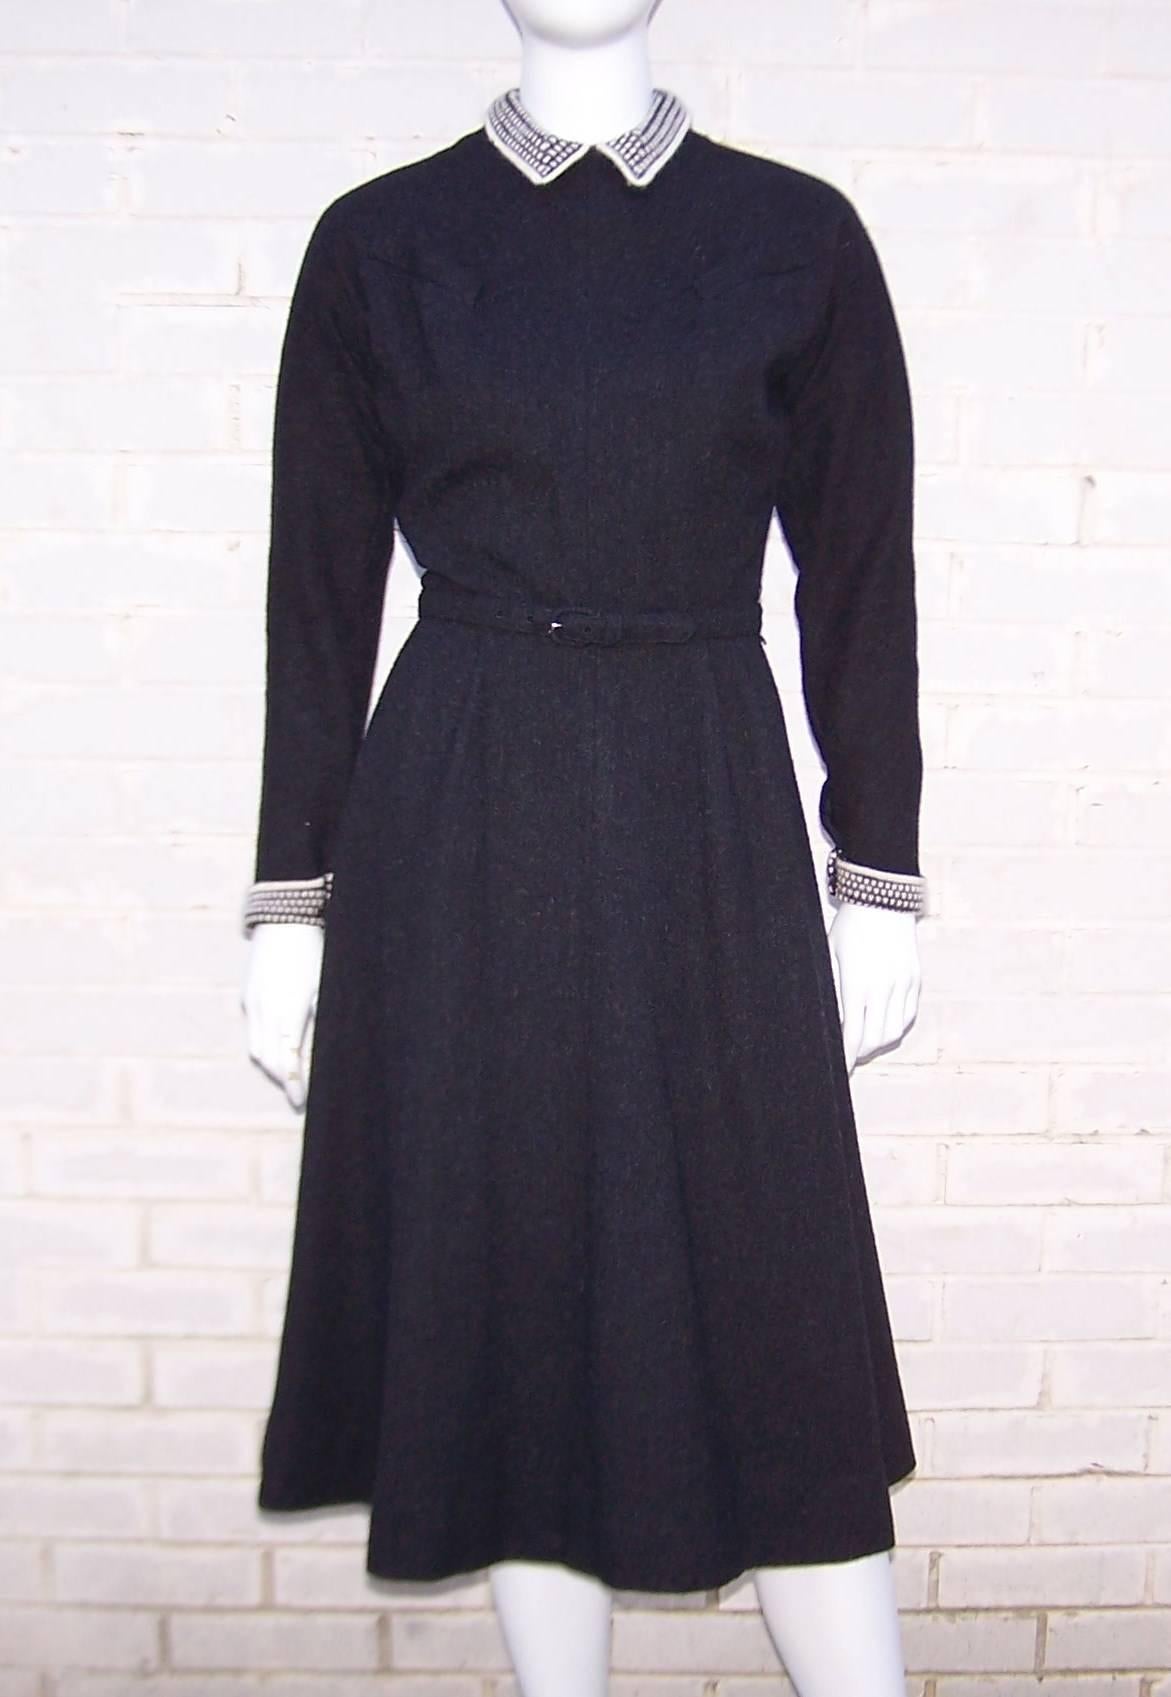 This charcoal gray wool dress conjures up images of fur ear muffs and ice skates.  It zips and hooks at the back with a coordinating skinny belt and faux breast pockets.  The raglan style bodice cinches at the waist and gives way to a full skirt